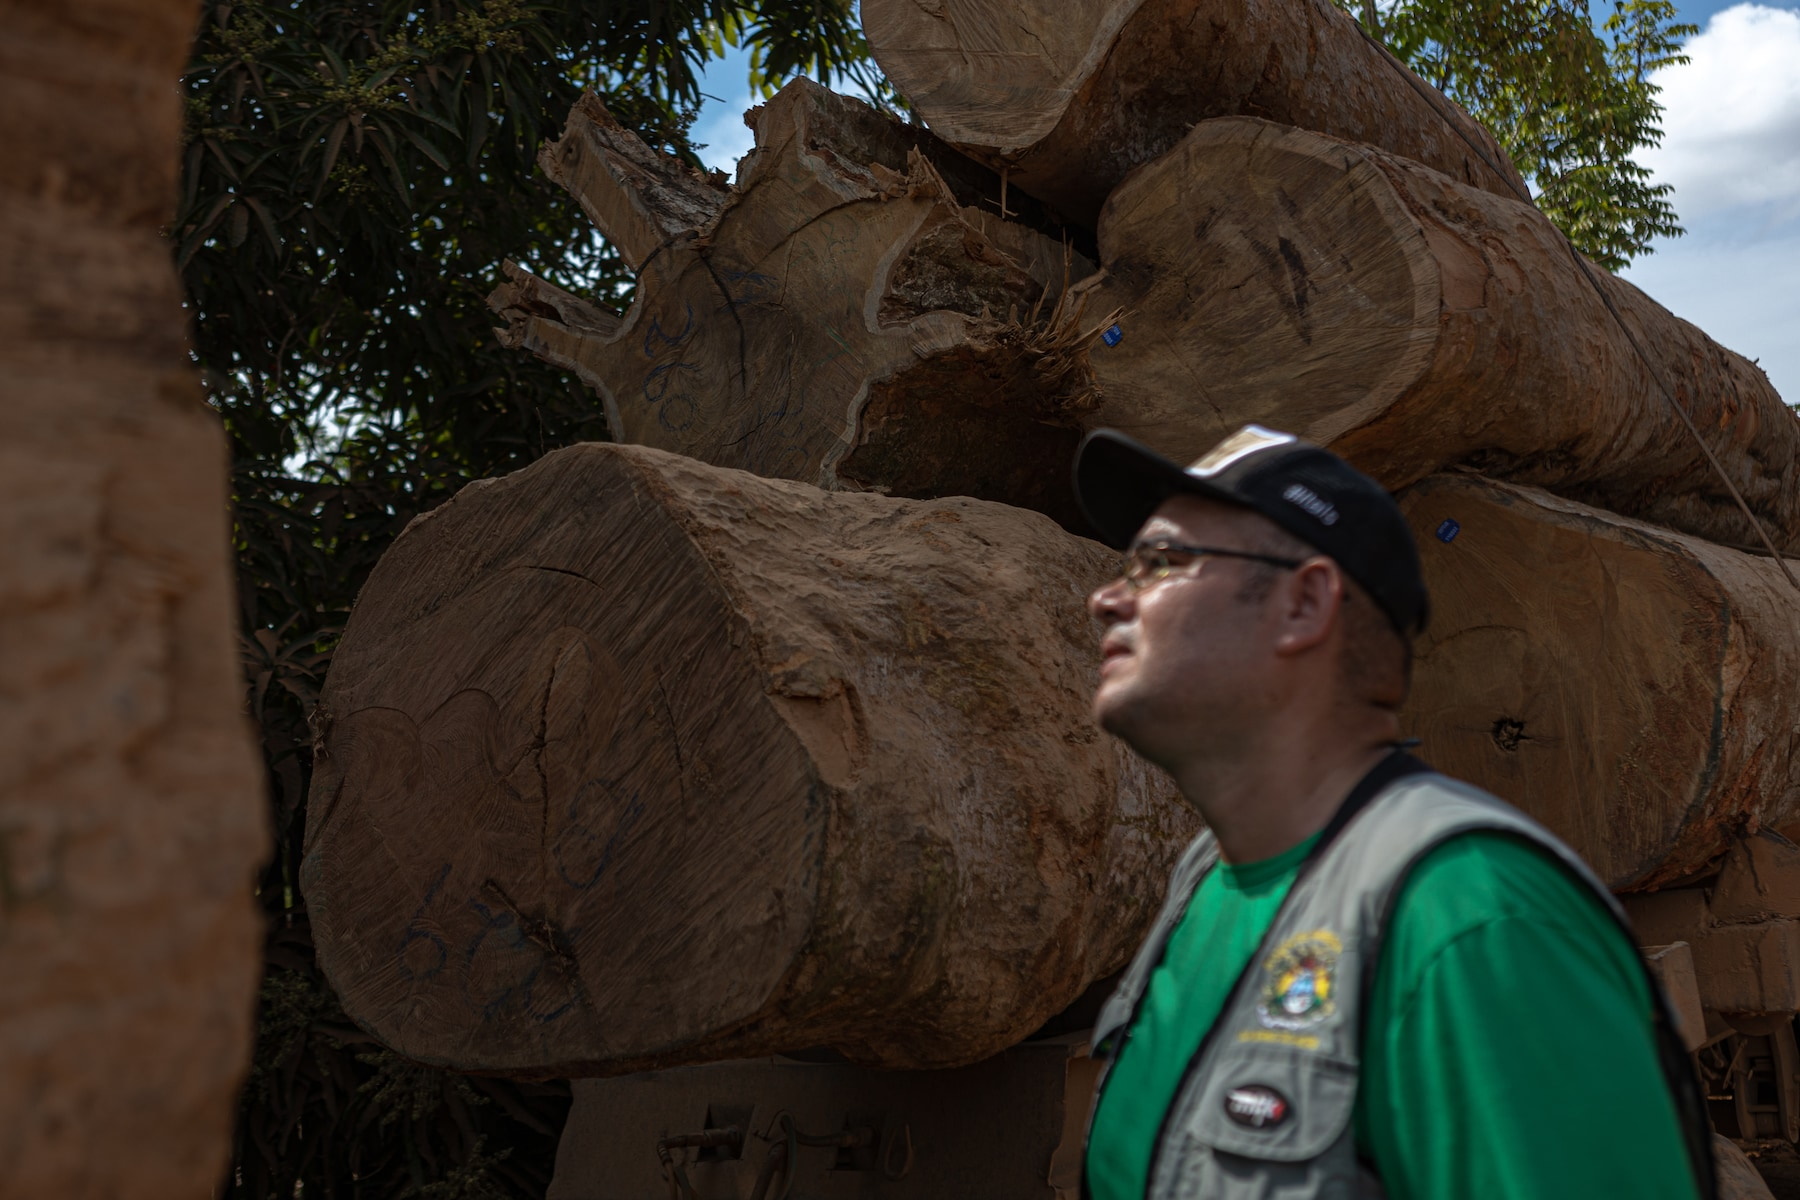 Daniel Valle, an inspector with the Acre Environmental Institute, examines a truckload of logs on 14 July 2022. The logs have a stamp that supposedly proves their legality by showing they were cut under a management plan. Photo: Rafael Vilela / The Washington Post